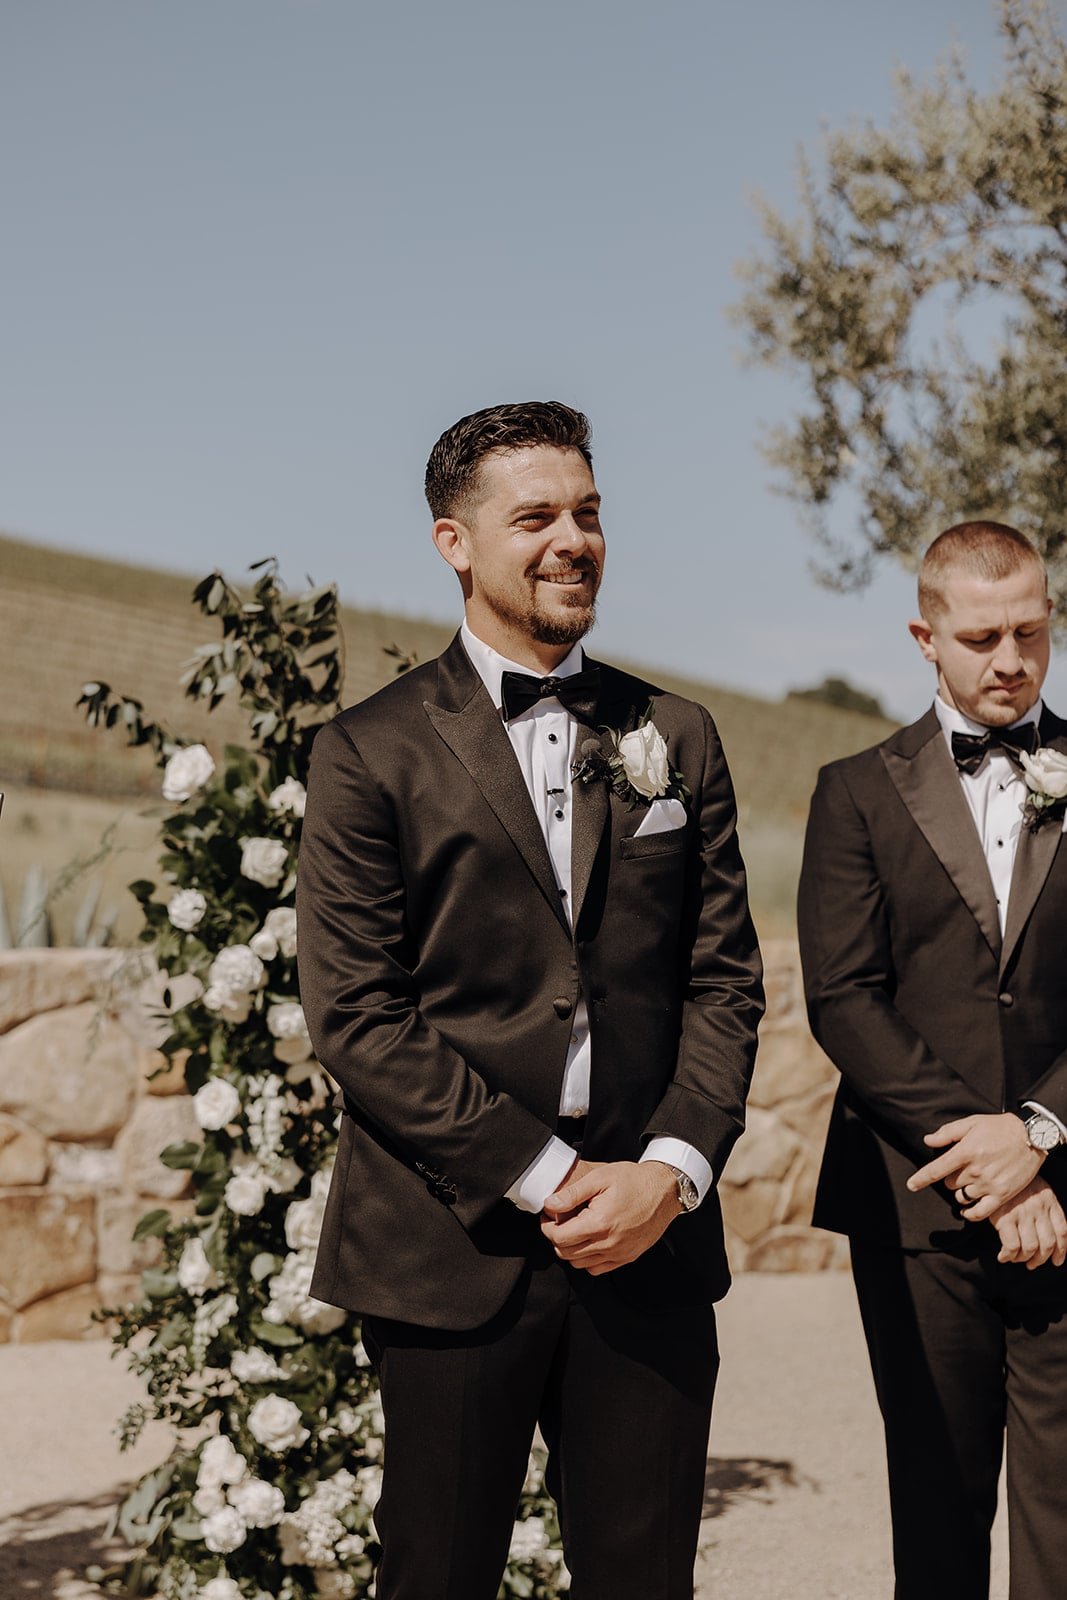 Groom standing at the end of the wedding aisle in a black tuxedo